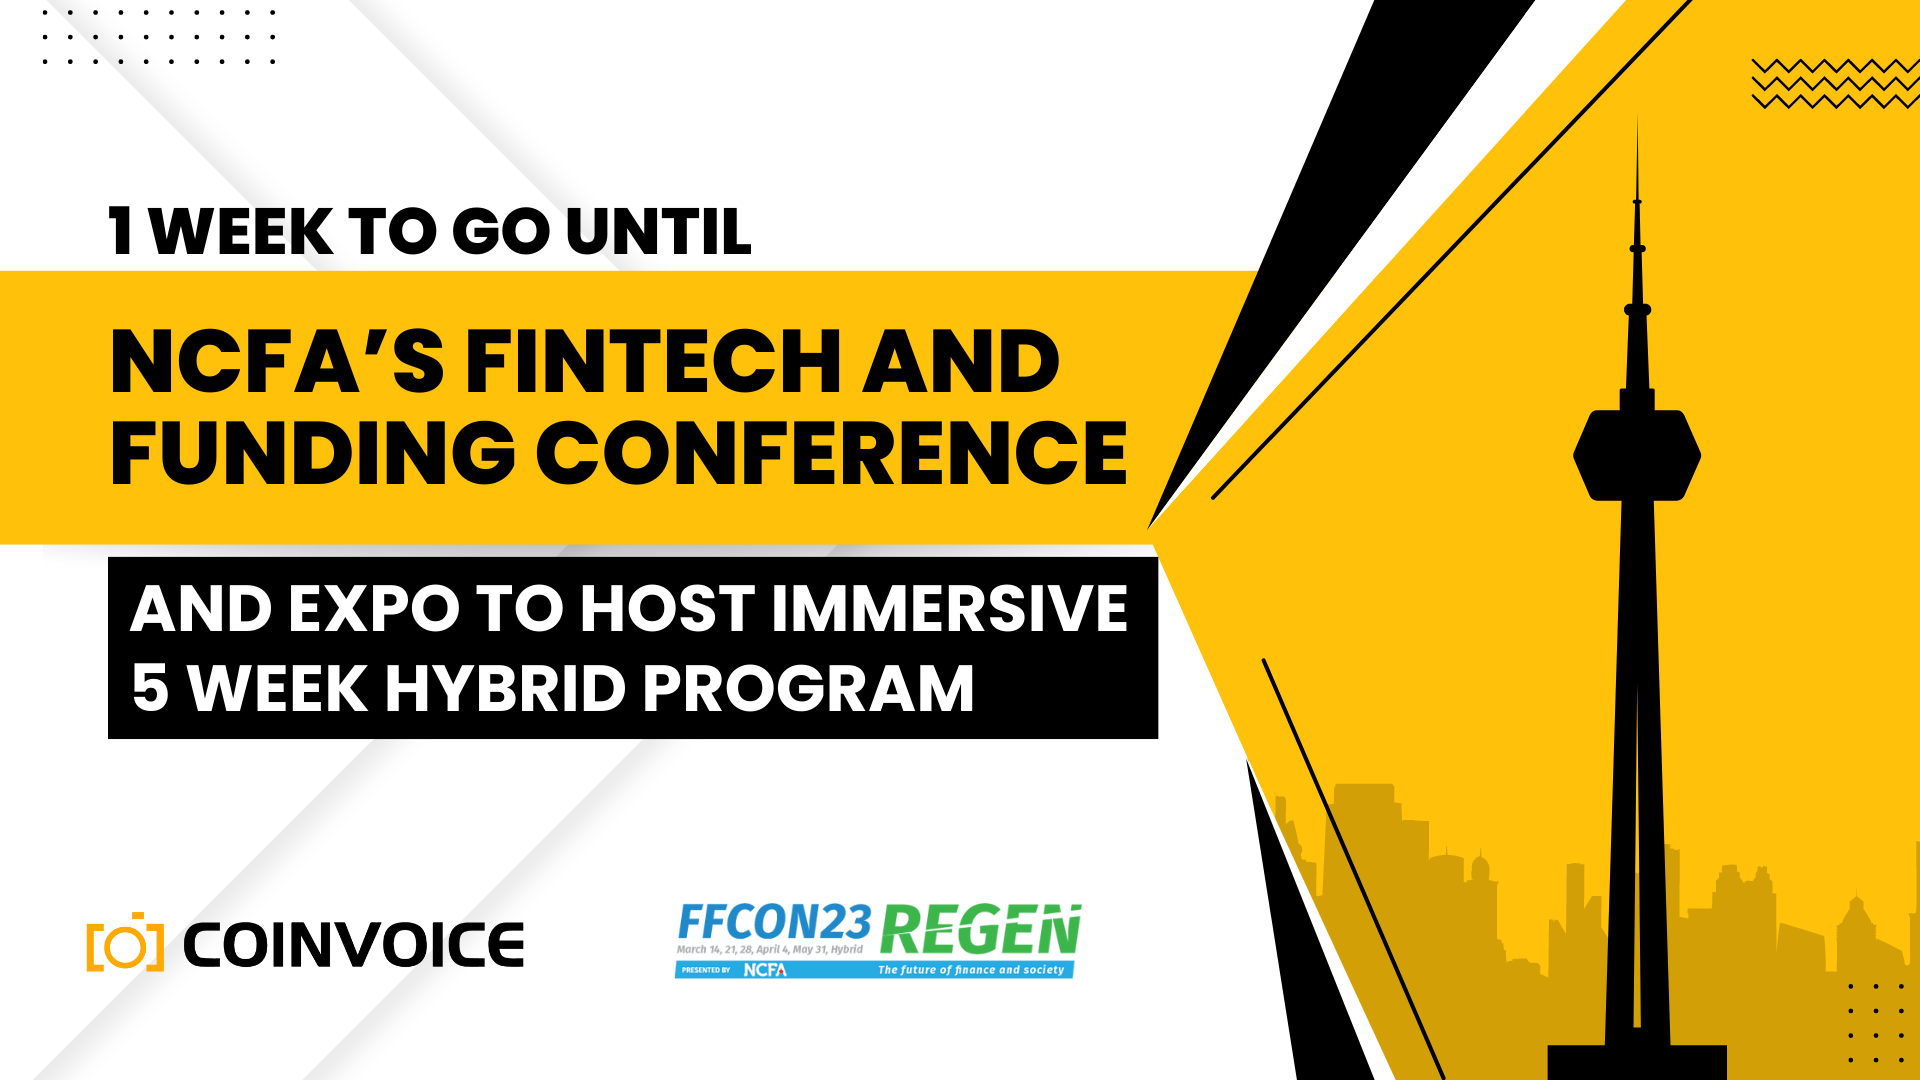 1 Week to Go Until NCFA’s Fintech and Funding Conference and Expo to Host an Immersive 5-Week Hybrid Program 